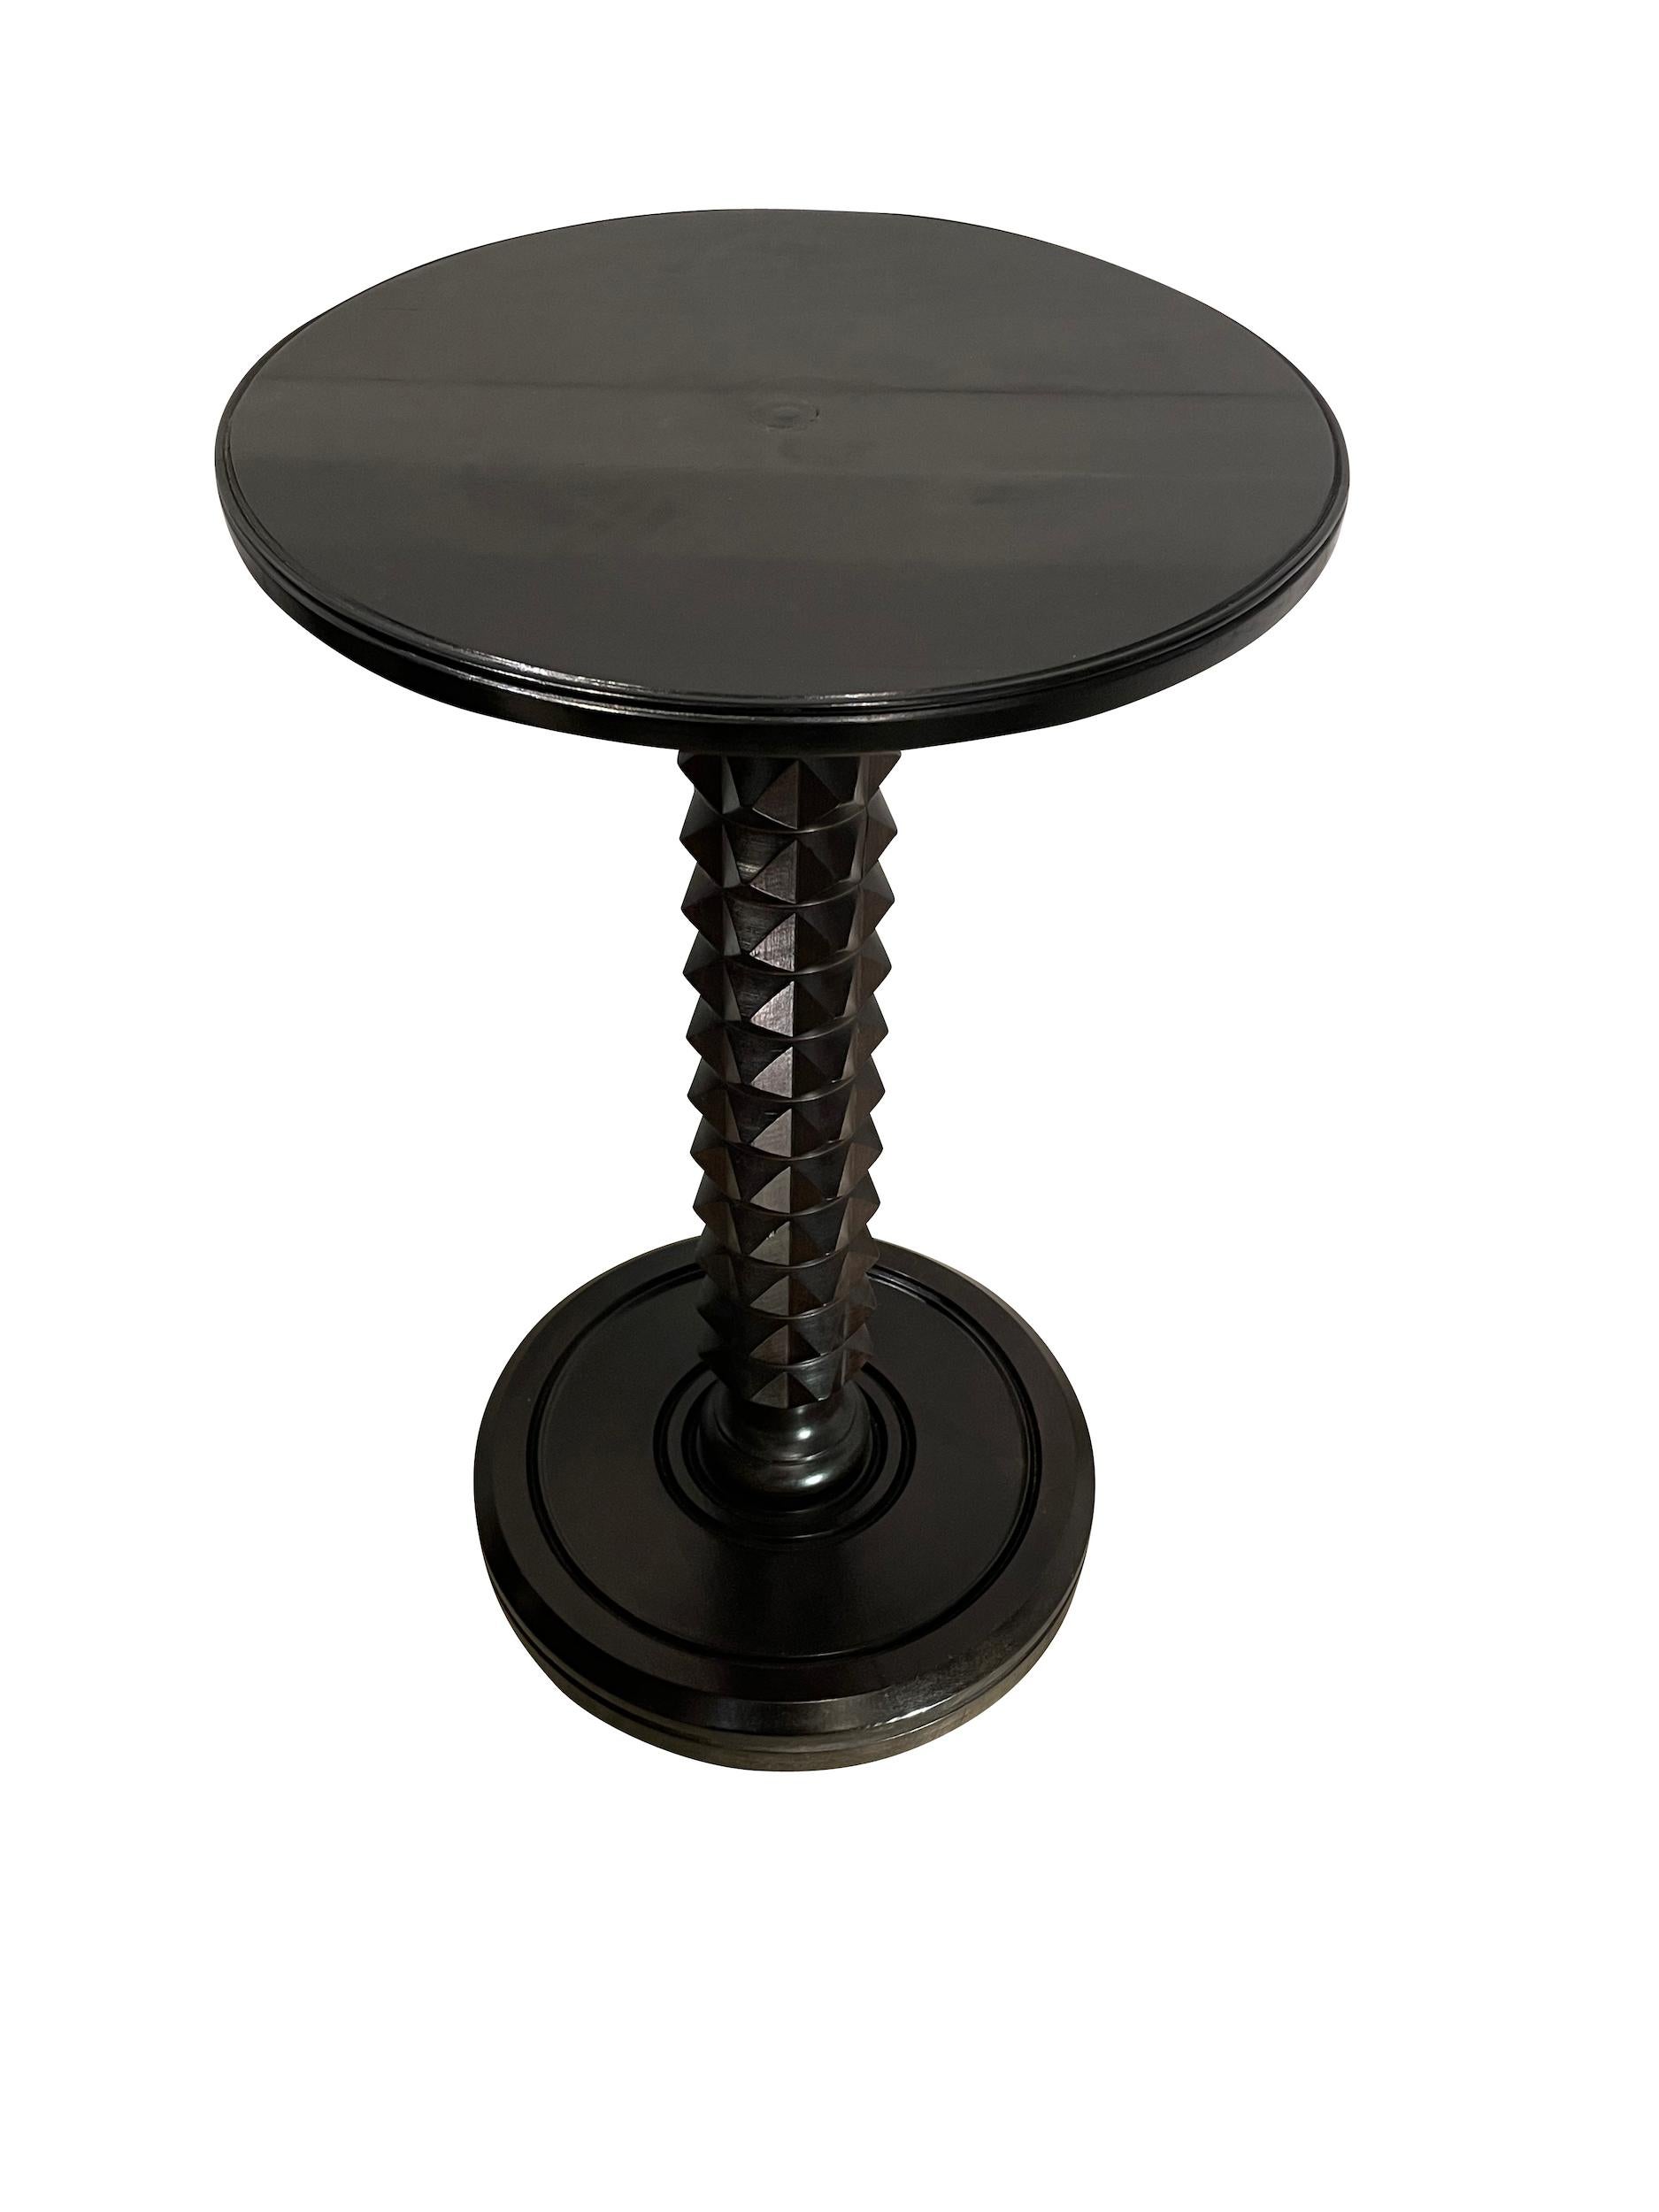 1940s French ebonized walnut side table in the style of Charles Dudouyt.
Classic carved pyramid shaped design pedestal.
